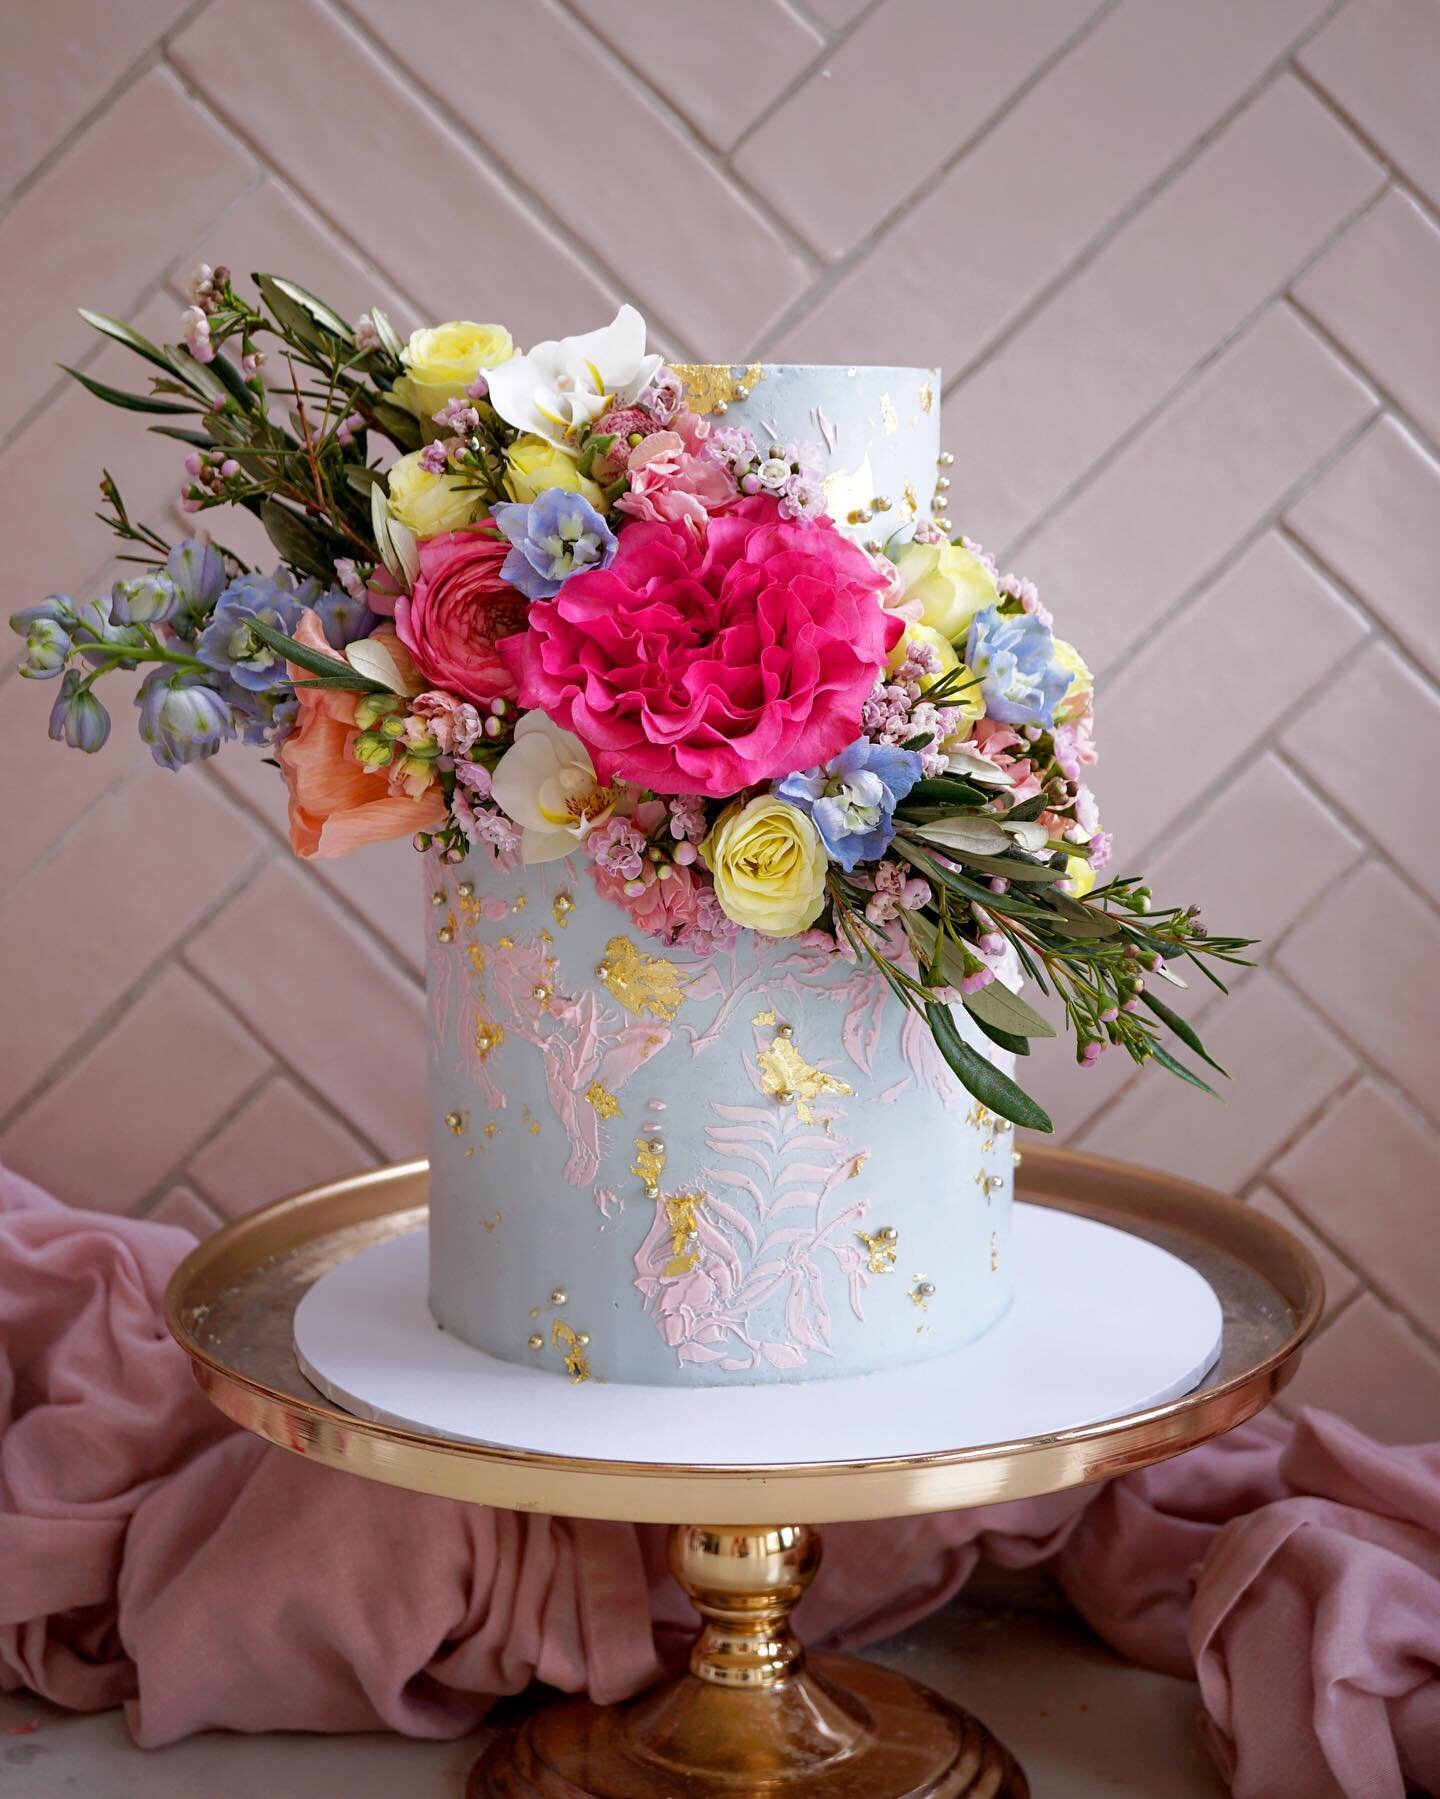 🌸🌼HBD TO ME🌼🌸
My little birthday cake from a few weeks ago! When will I not make my own cake!? Bakers do you always make your own? 

Stencil - @belsizecakes 
Florals @secretgardencardiff 
Cake stand @prop.options 

⠀⠀⠀⠀⠀⠀⠀⠀
birthdaycake #pastelca